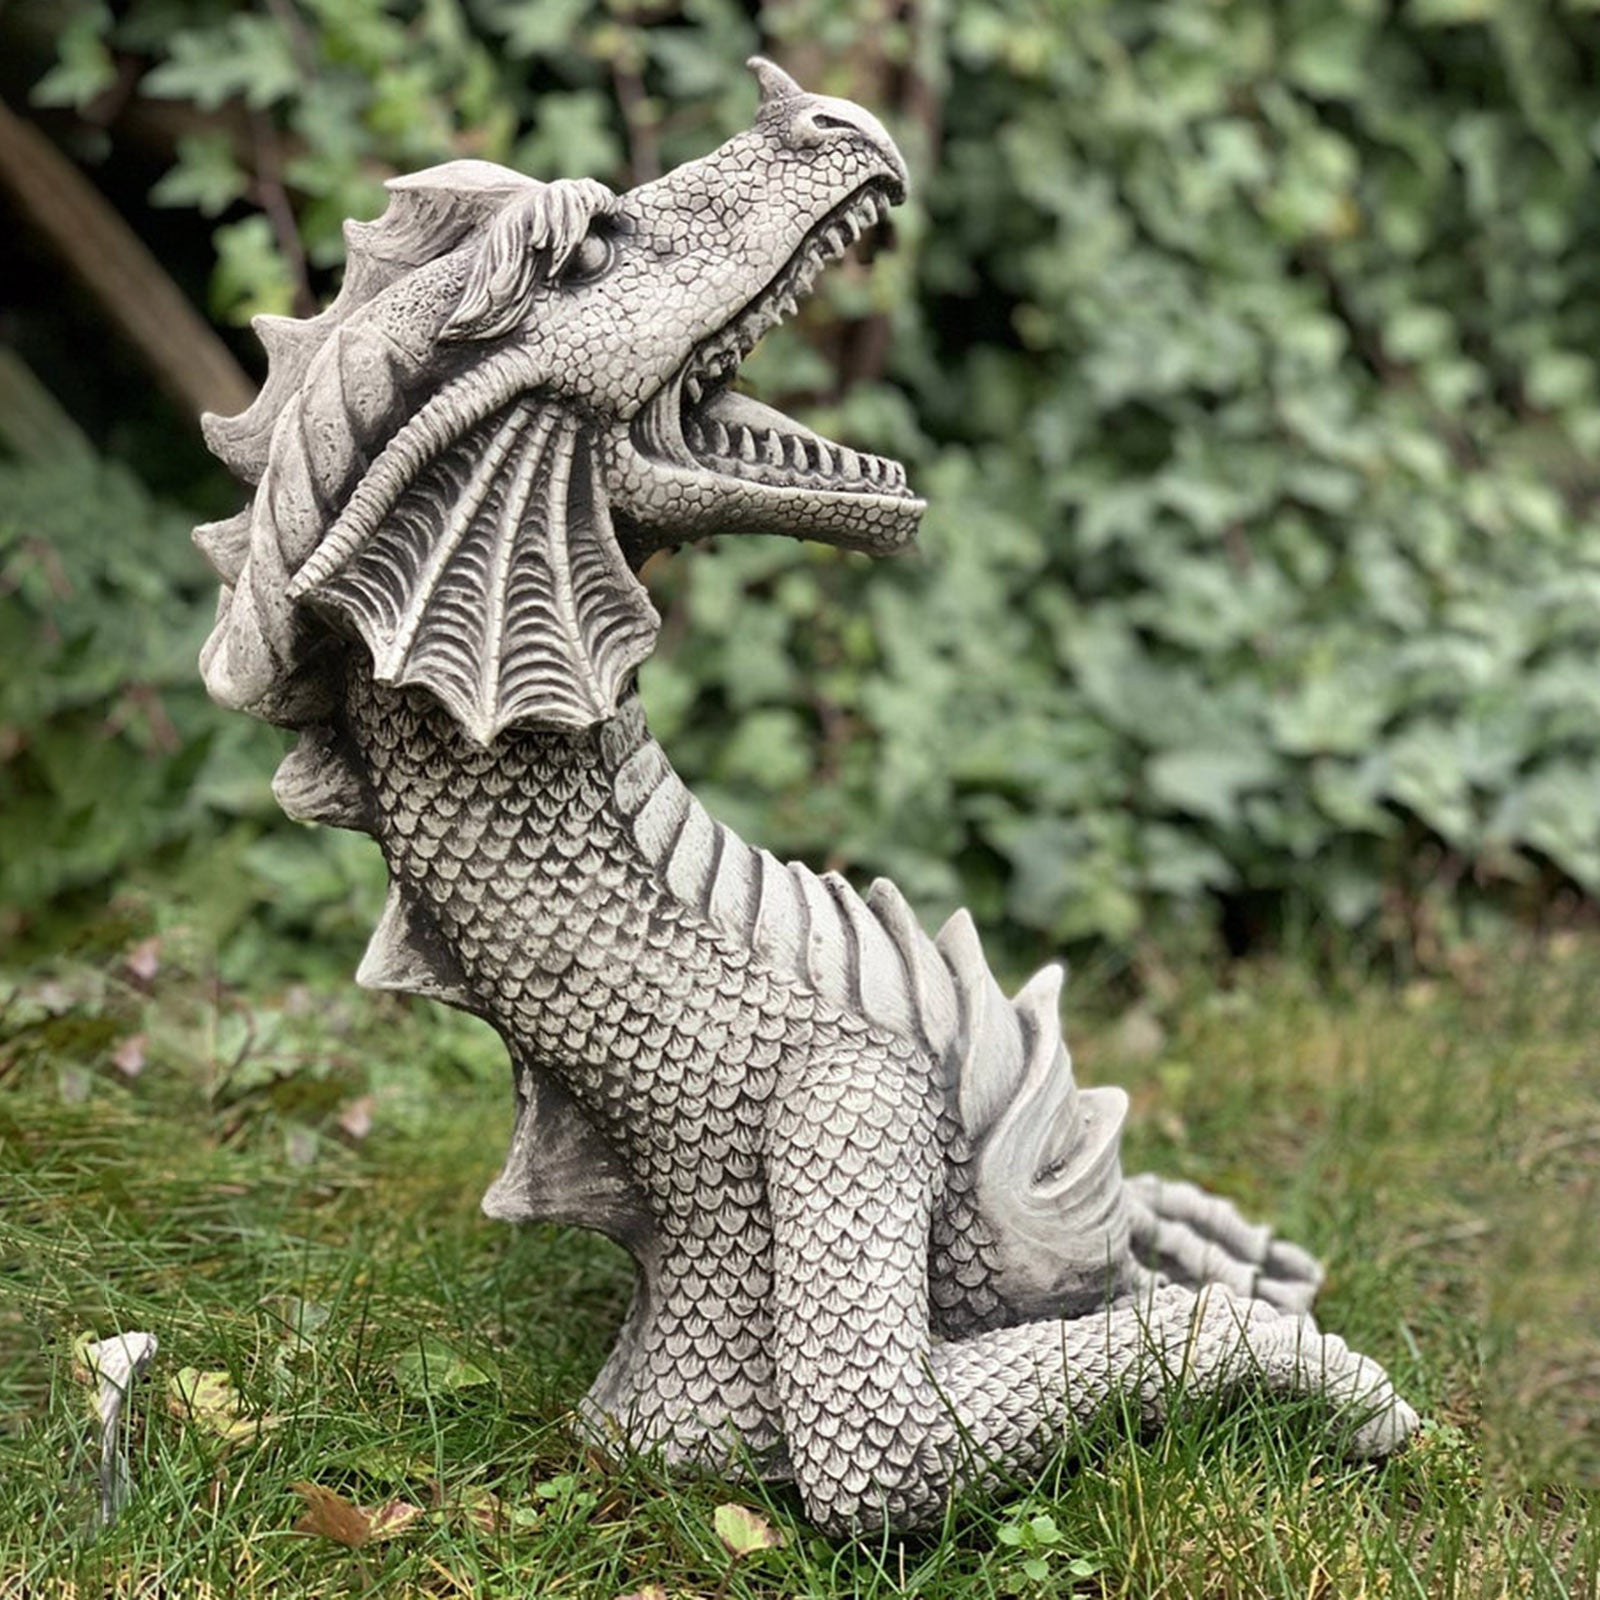 Majestic Dragon Gothic Garden Decor Statue: Transform Your Outdoor Sanctuary with Mythical Grandeur